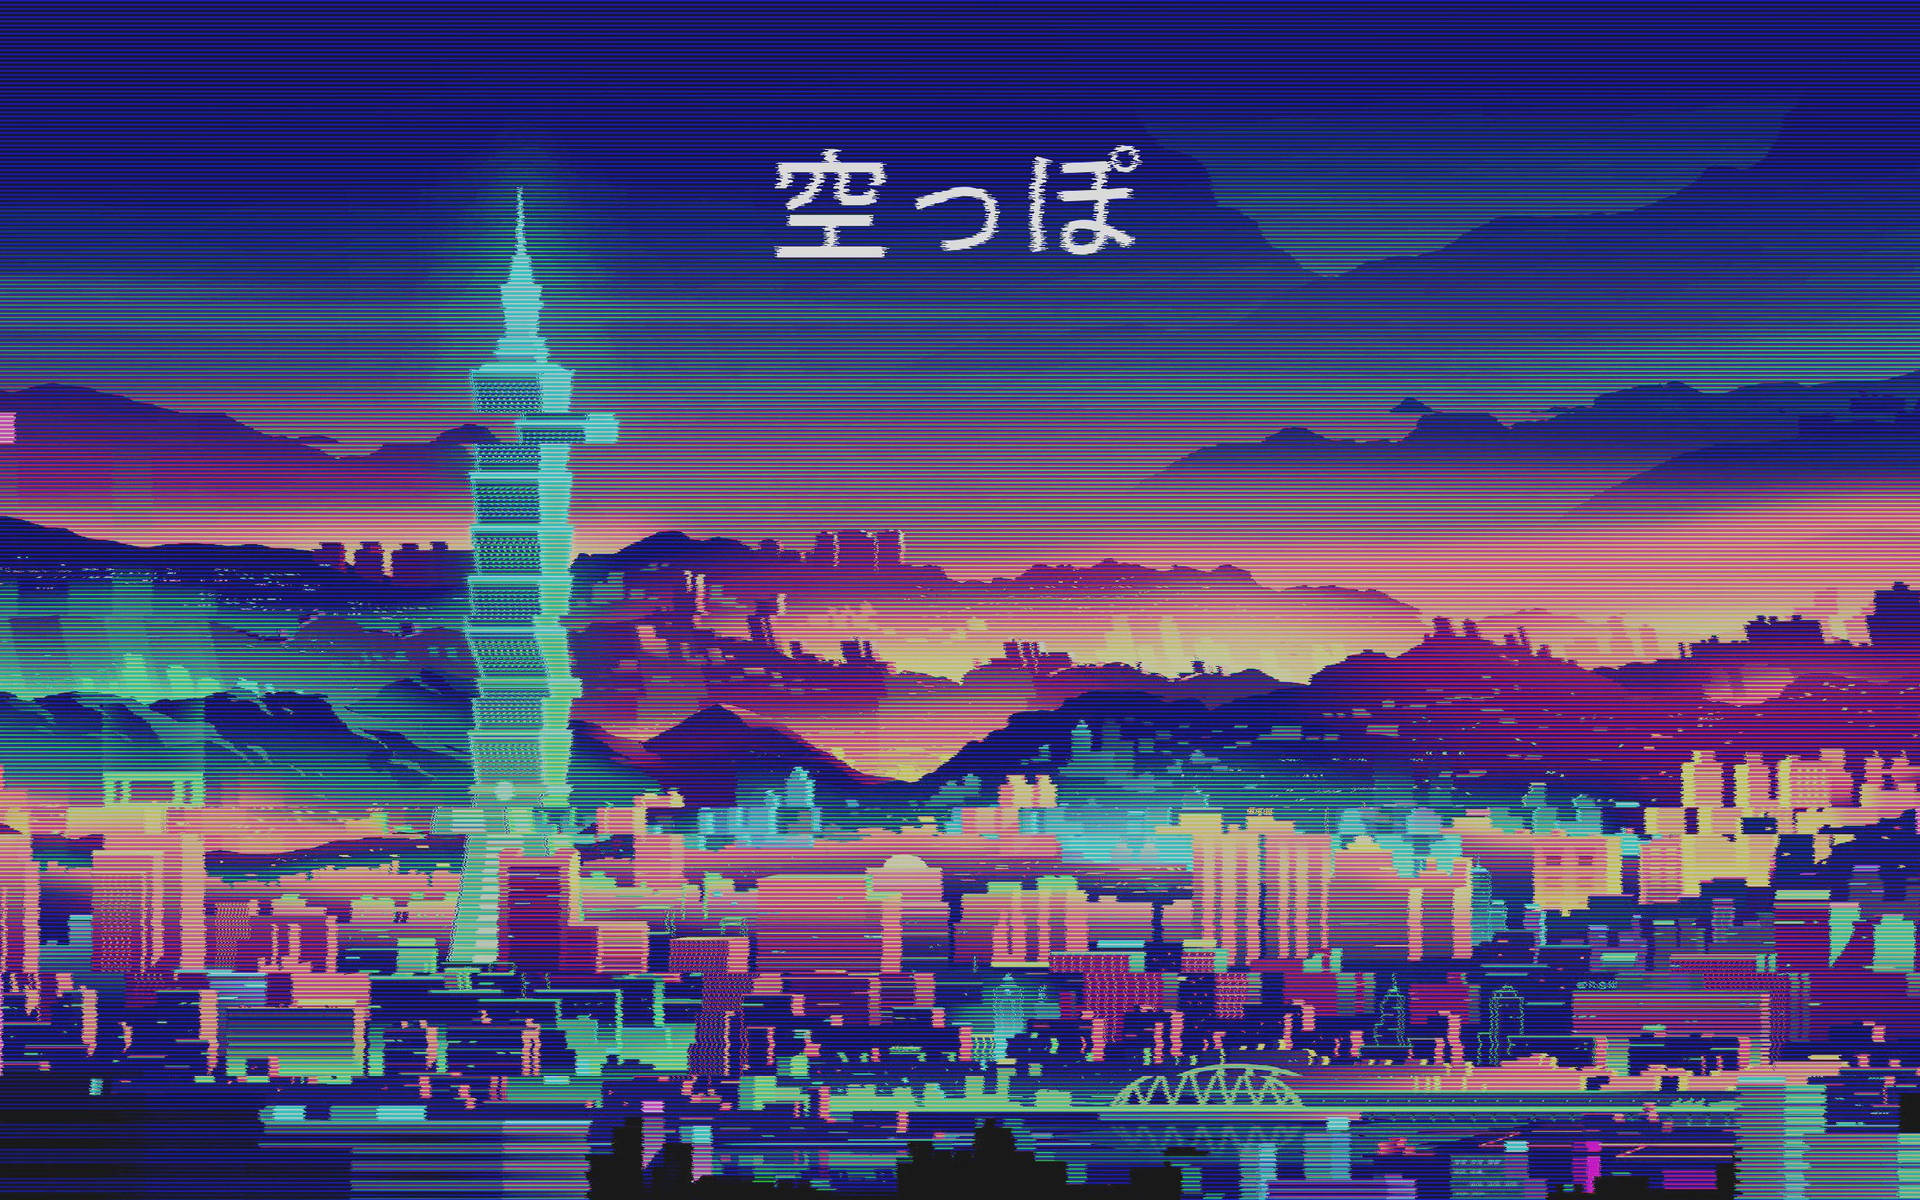 Anime Aesthetic Wallpapers